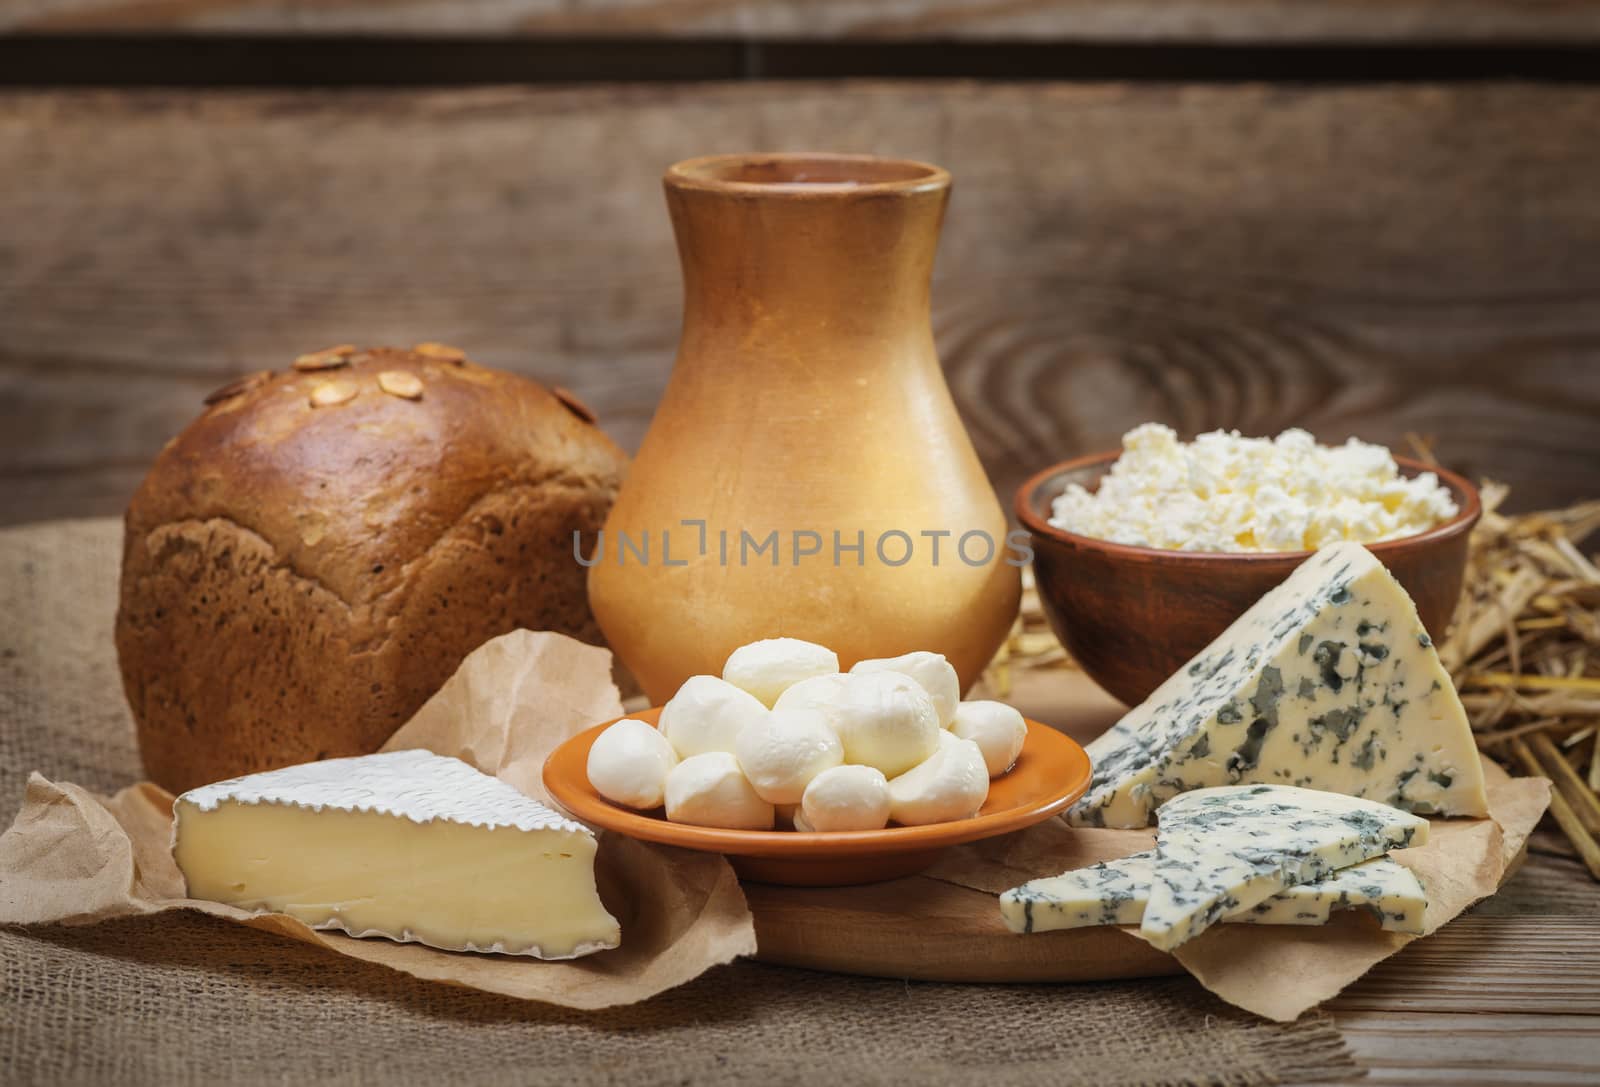 Rustic natural dairy products, whole milk, cottage cheese, cut slices of blue cheese with mold, mozzarella cheese, Camembert, rustic bread, burlap, straw on the old wooden background